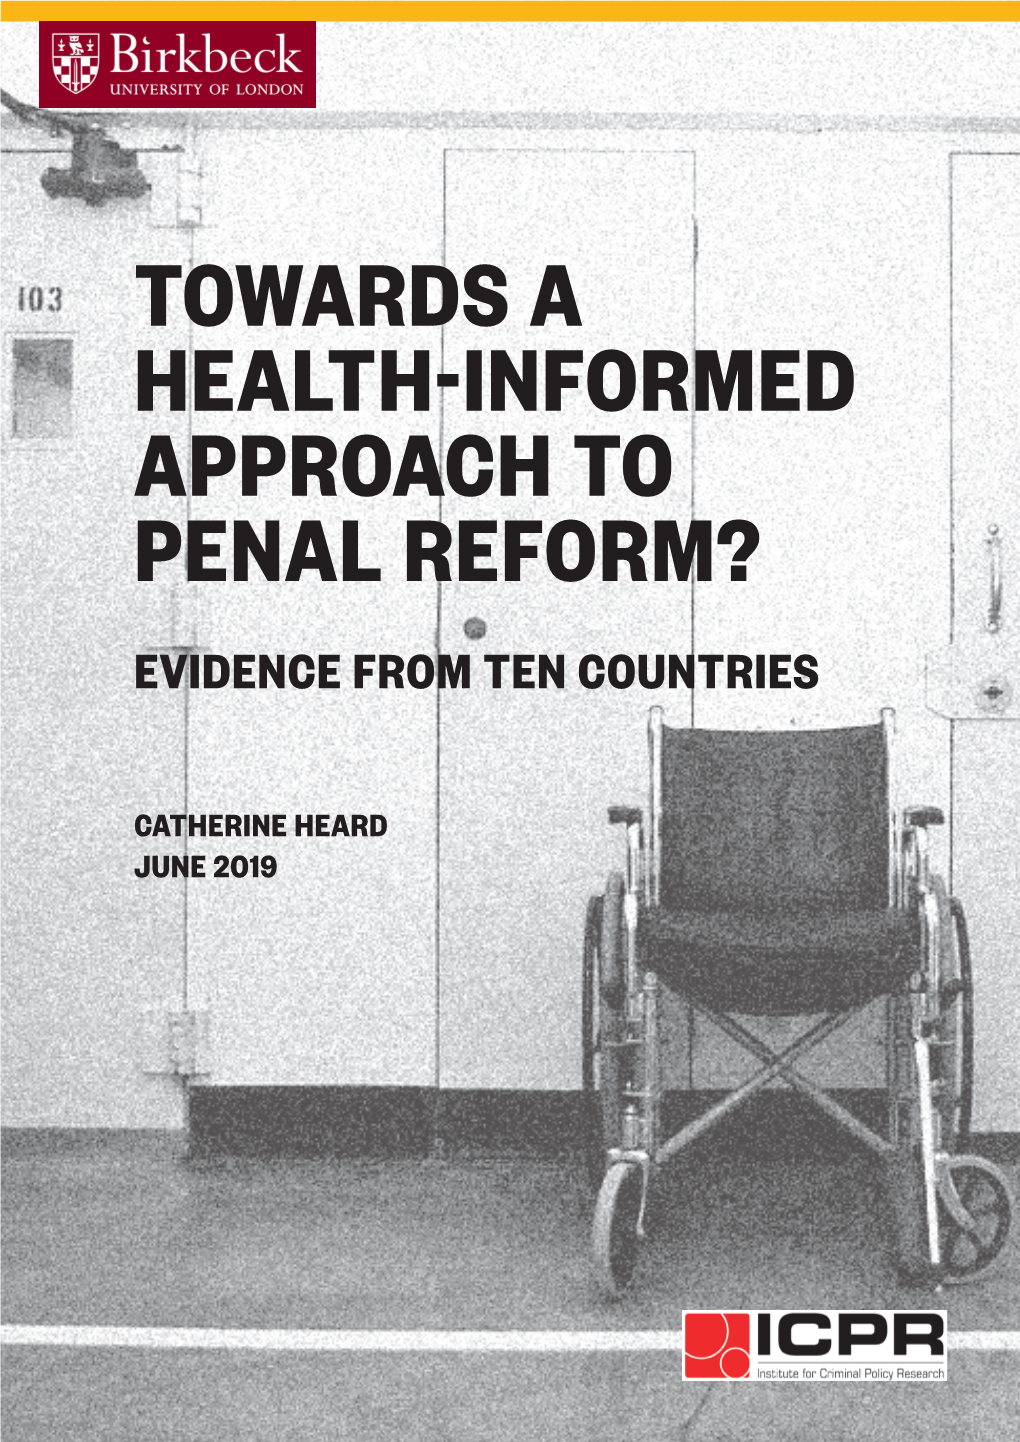 Towards a Health-Informed Approach to Penal Reform? Evidence from Ten Countries